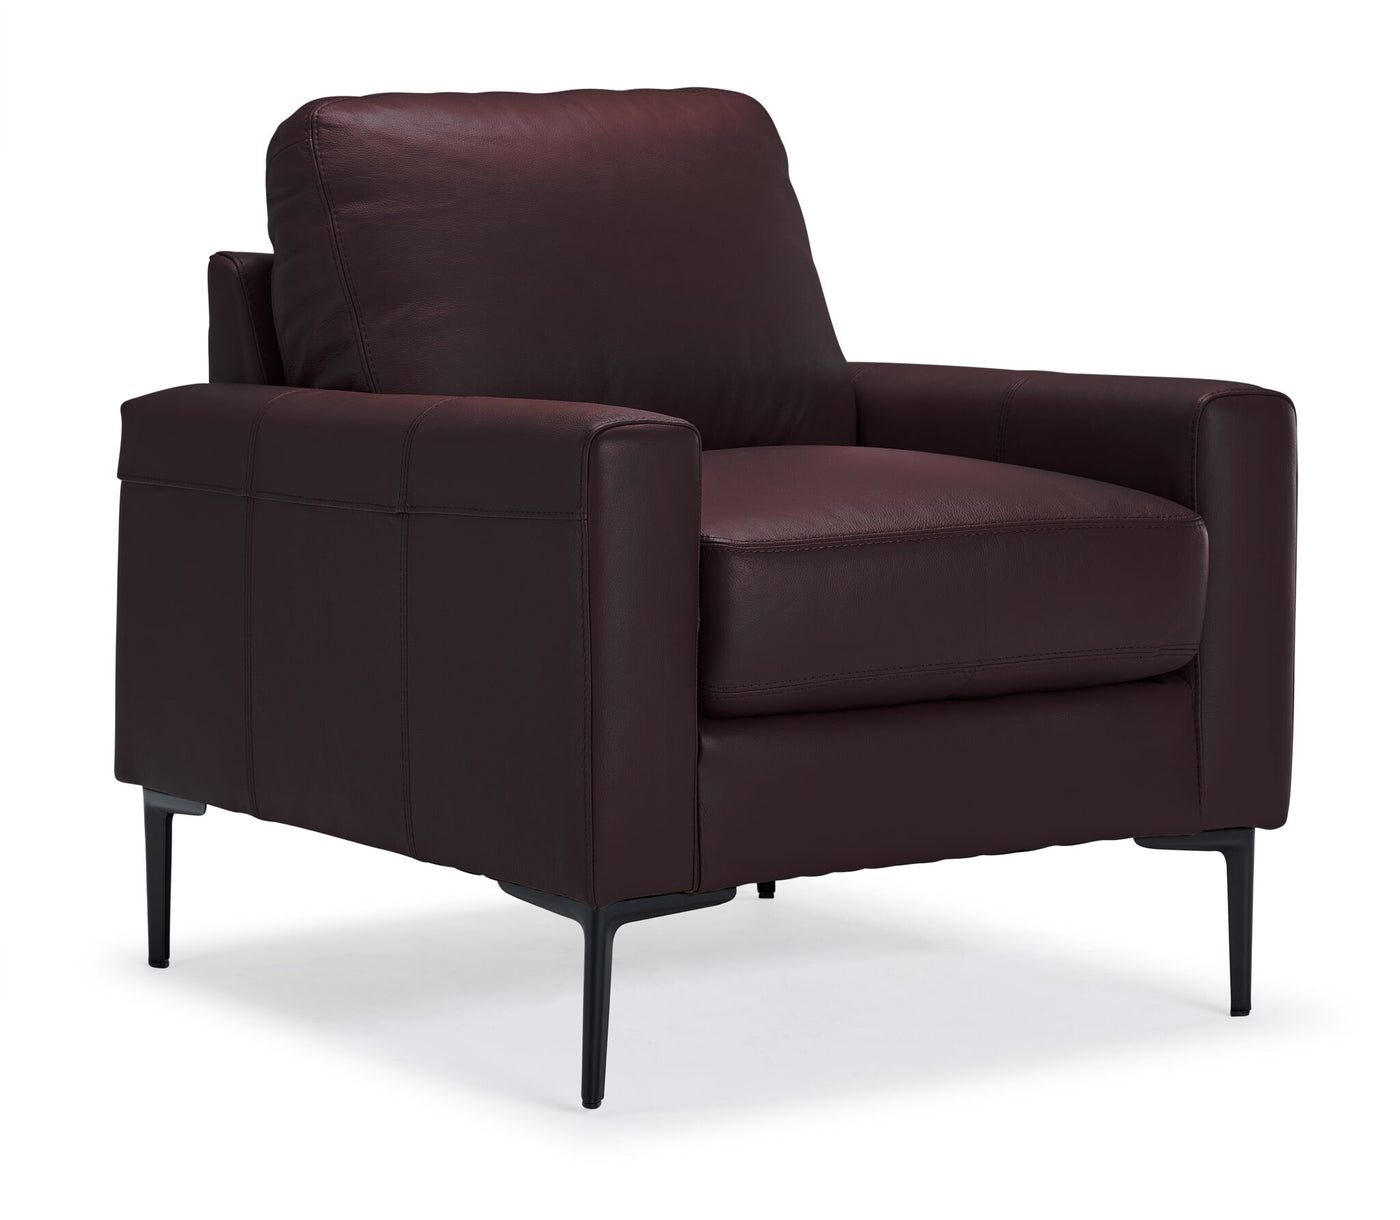 Chito Leather Sofa and Chair Set - Mocha